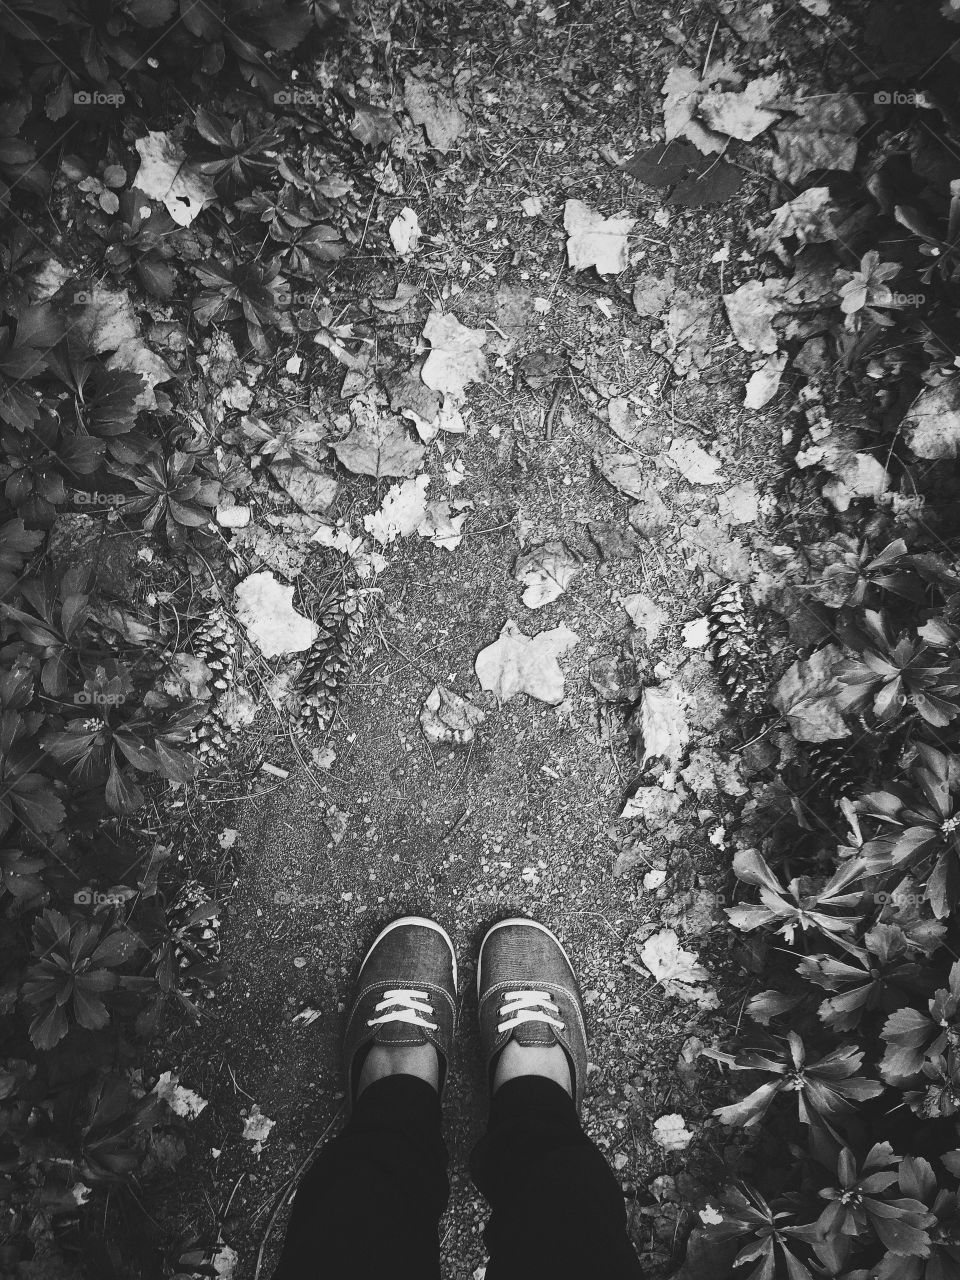 Dead leaves and the dirty ground 